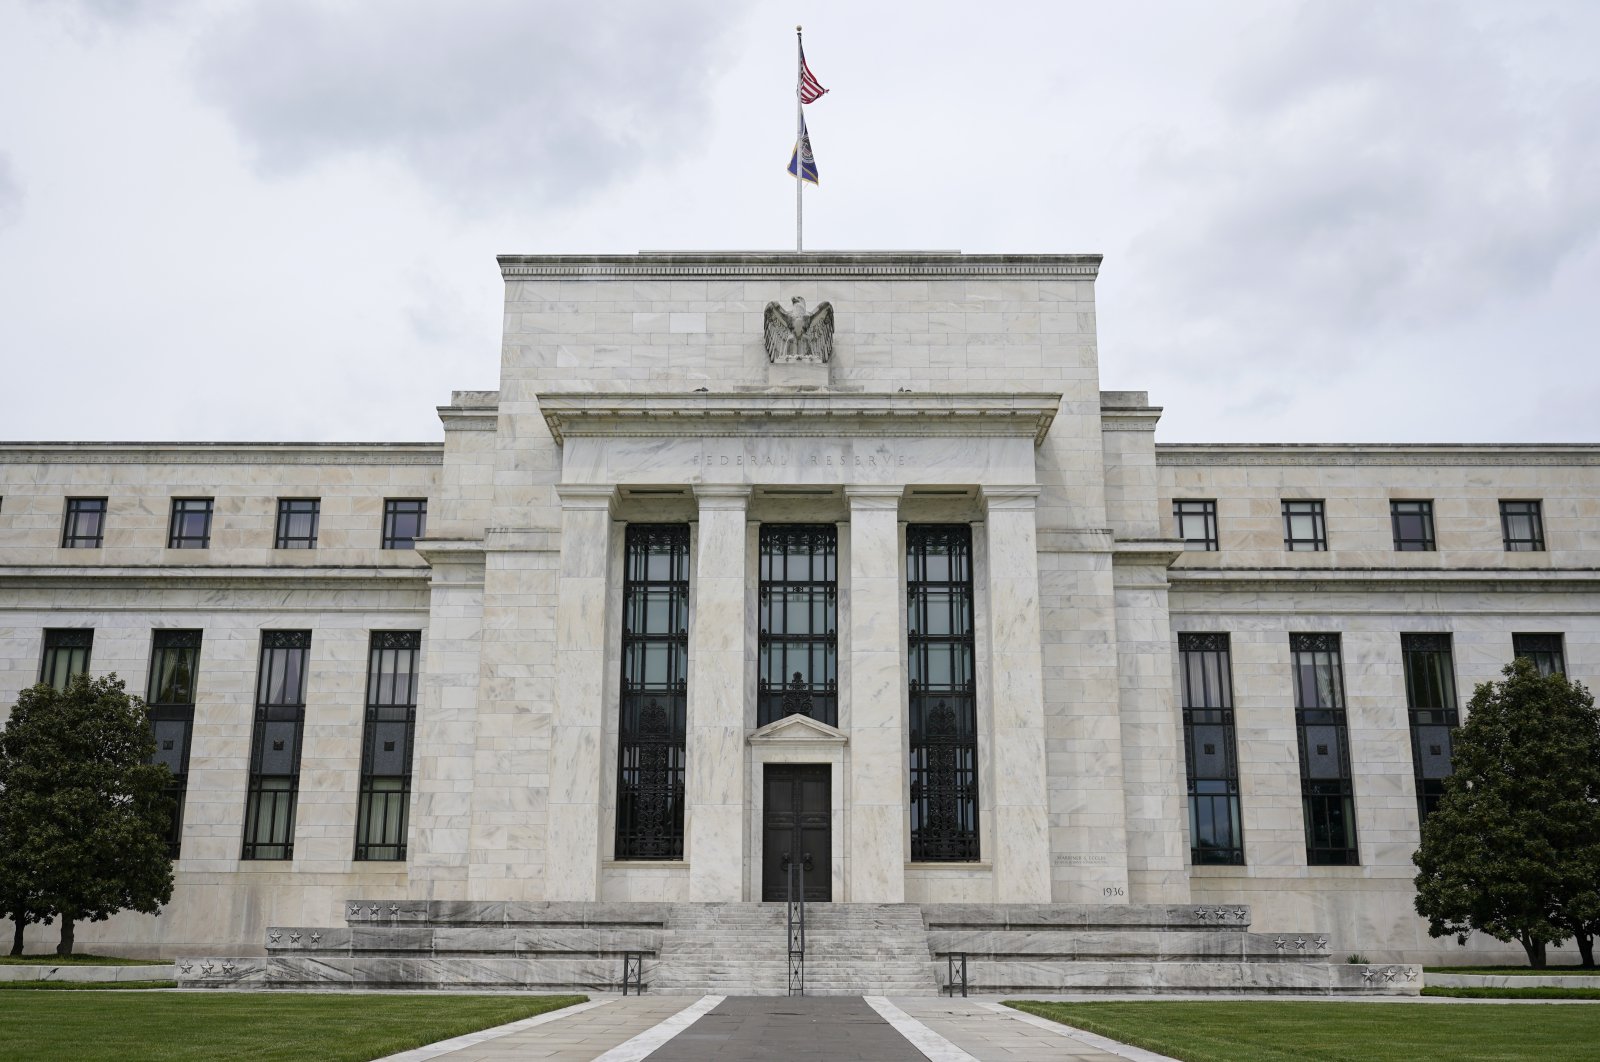 The United States Federal Reserve (Fed) building in Washington, U.S., May 4, 2021. (AP Photo)